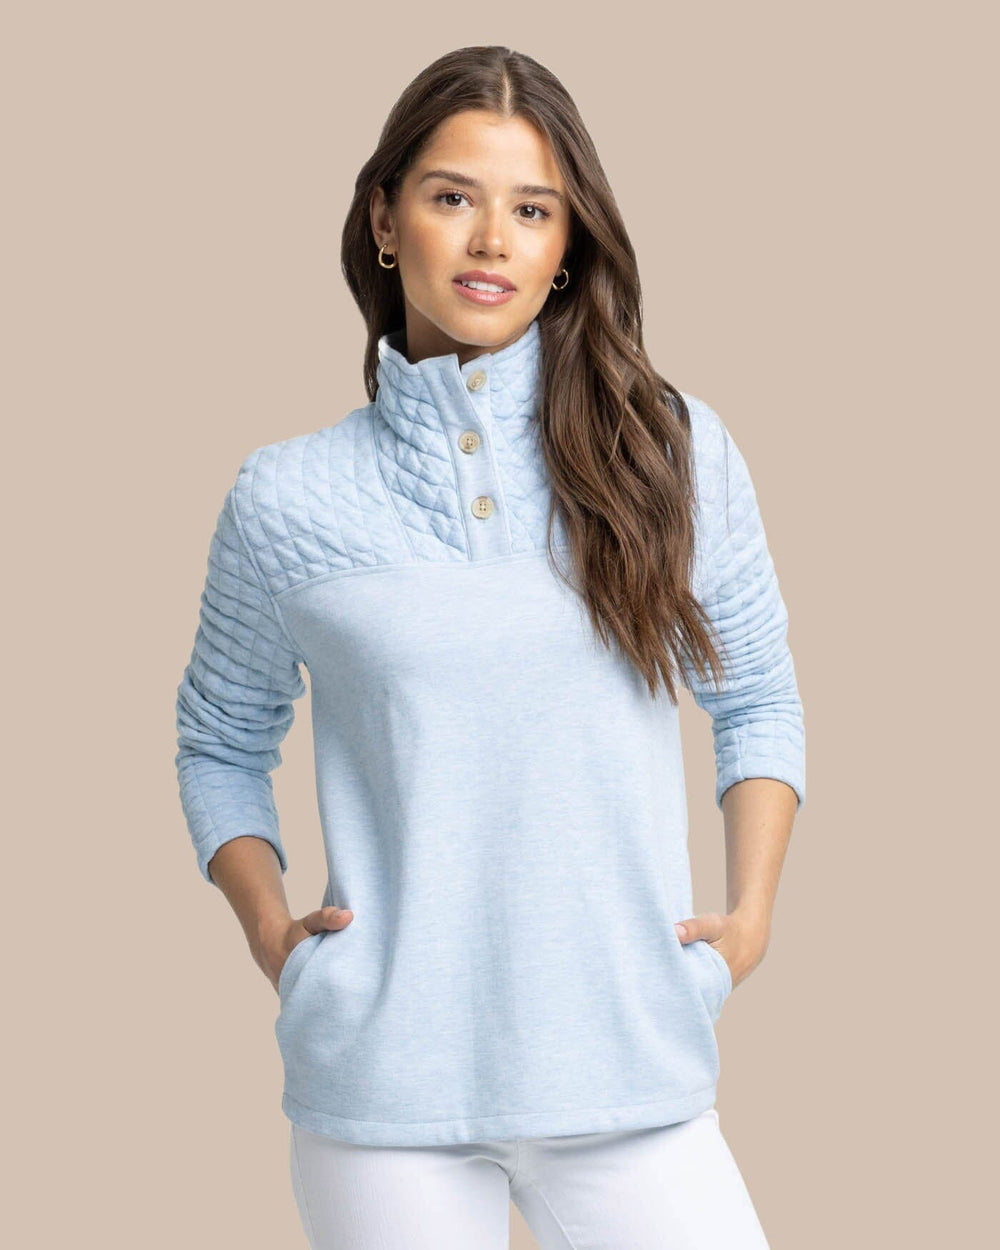 The front view of the Southern Tide Kelsea Quilted Heather Pullover by Southern Tide - Heather Dream Blue